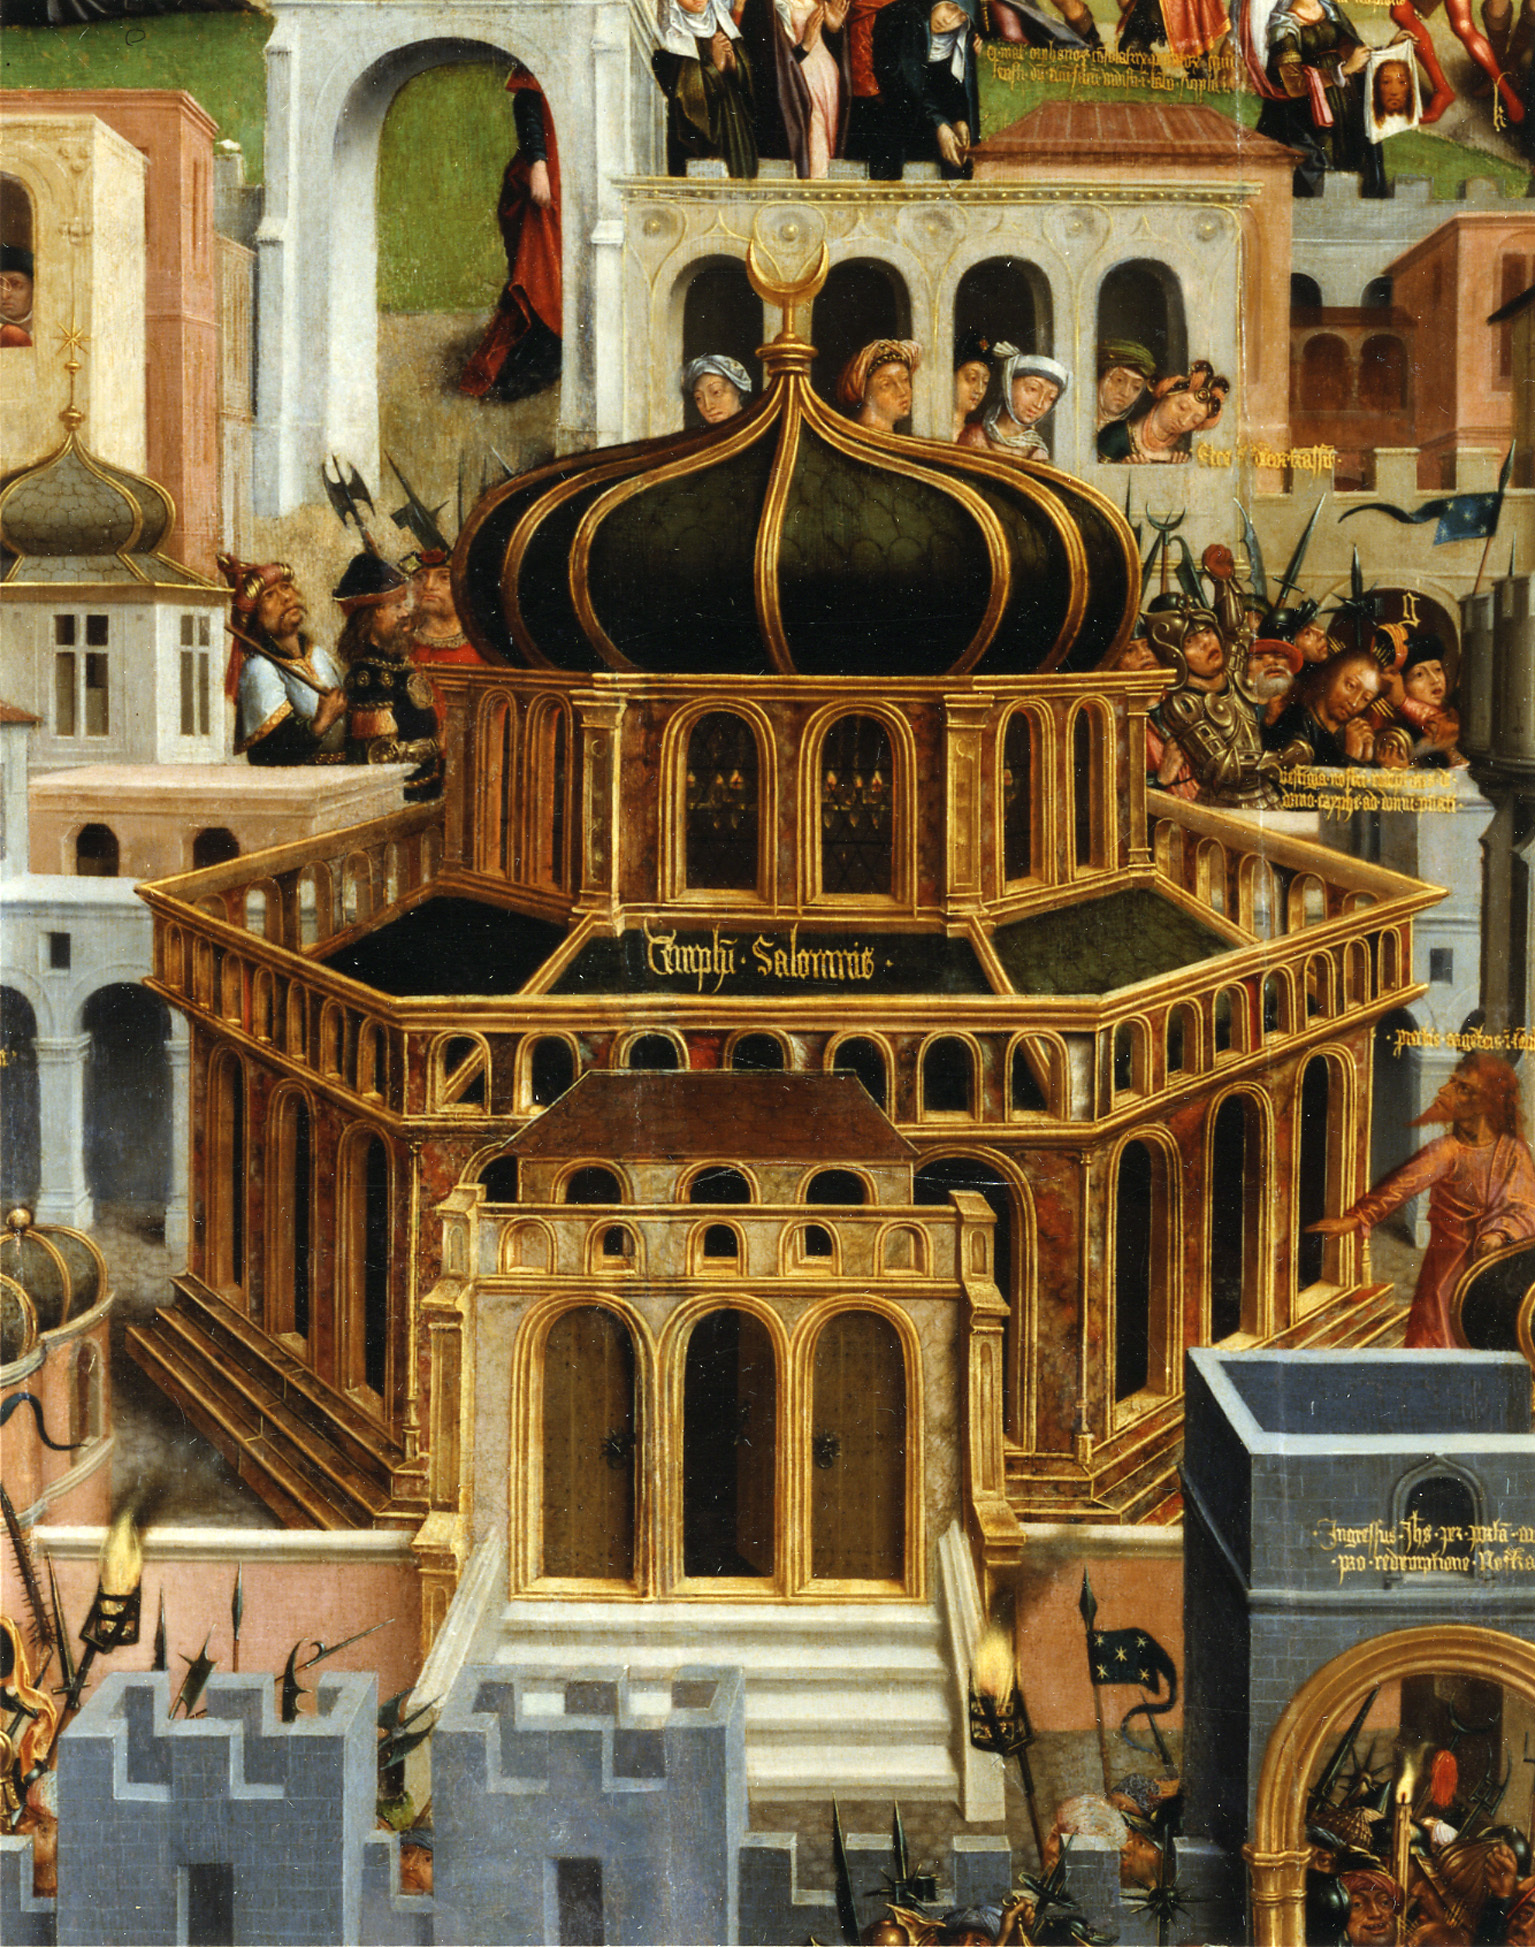 Crusading in a Lisbon Convent: The Making and Meaning of The Passion of  Christ in Jerusalem (Lisbon, ca. 1500) - Journal of Historians of  Netherlandish Art